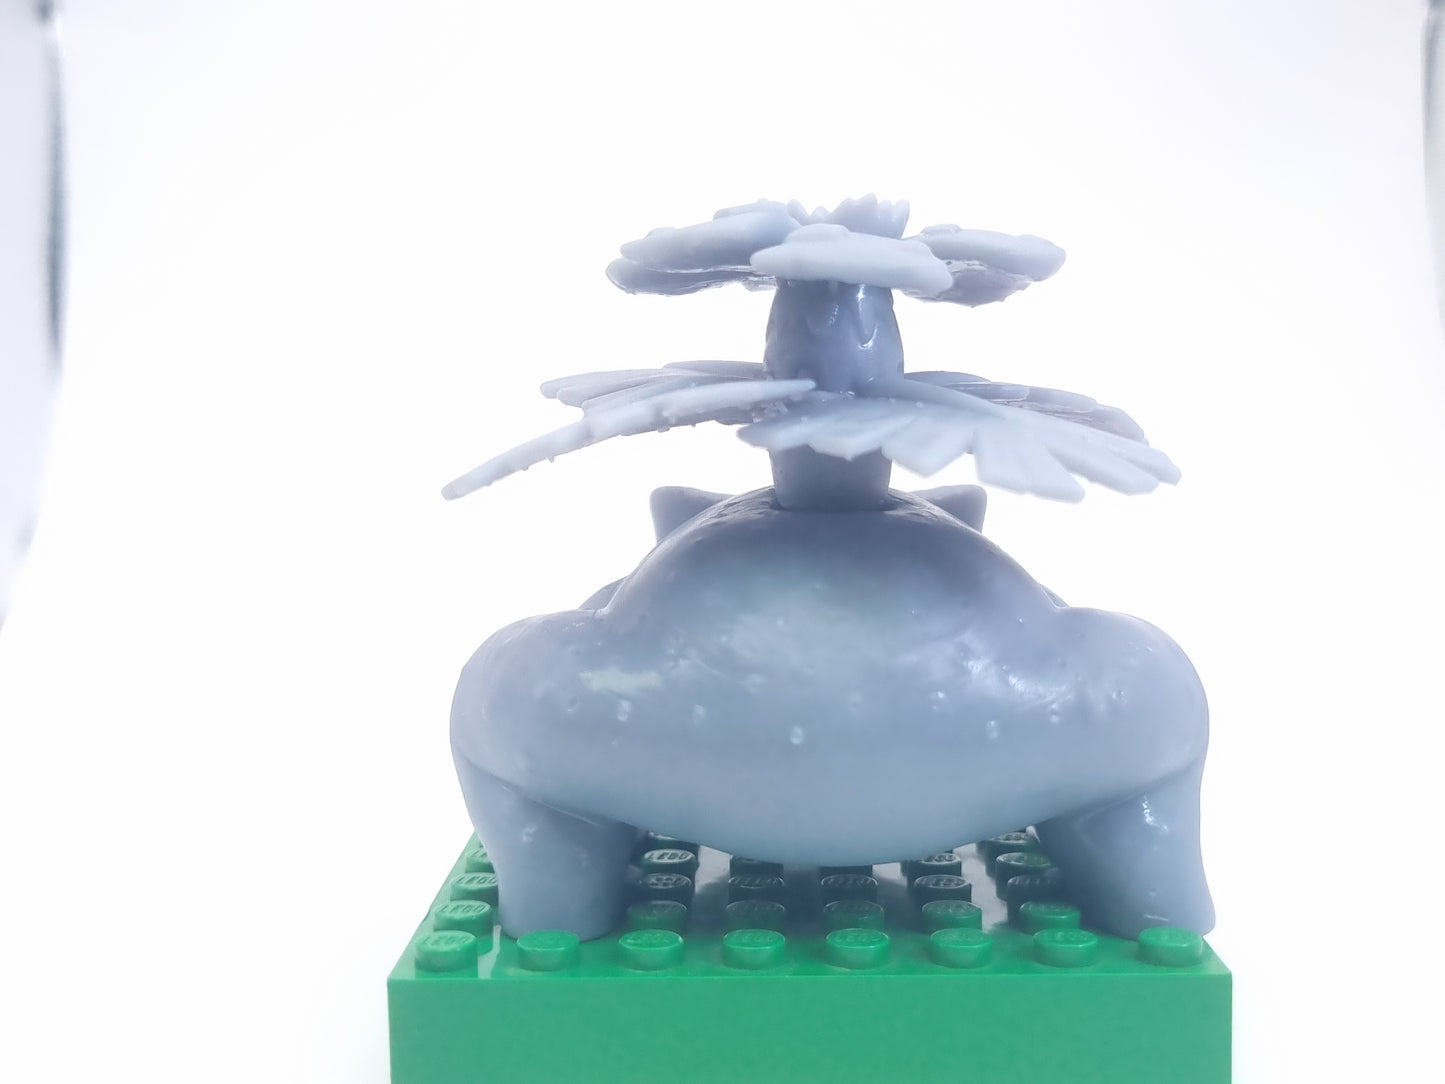 Lego compatible custom 3D printed creature with tree on his back!